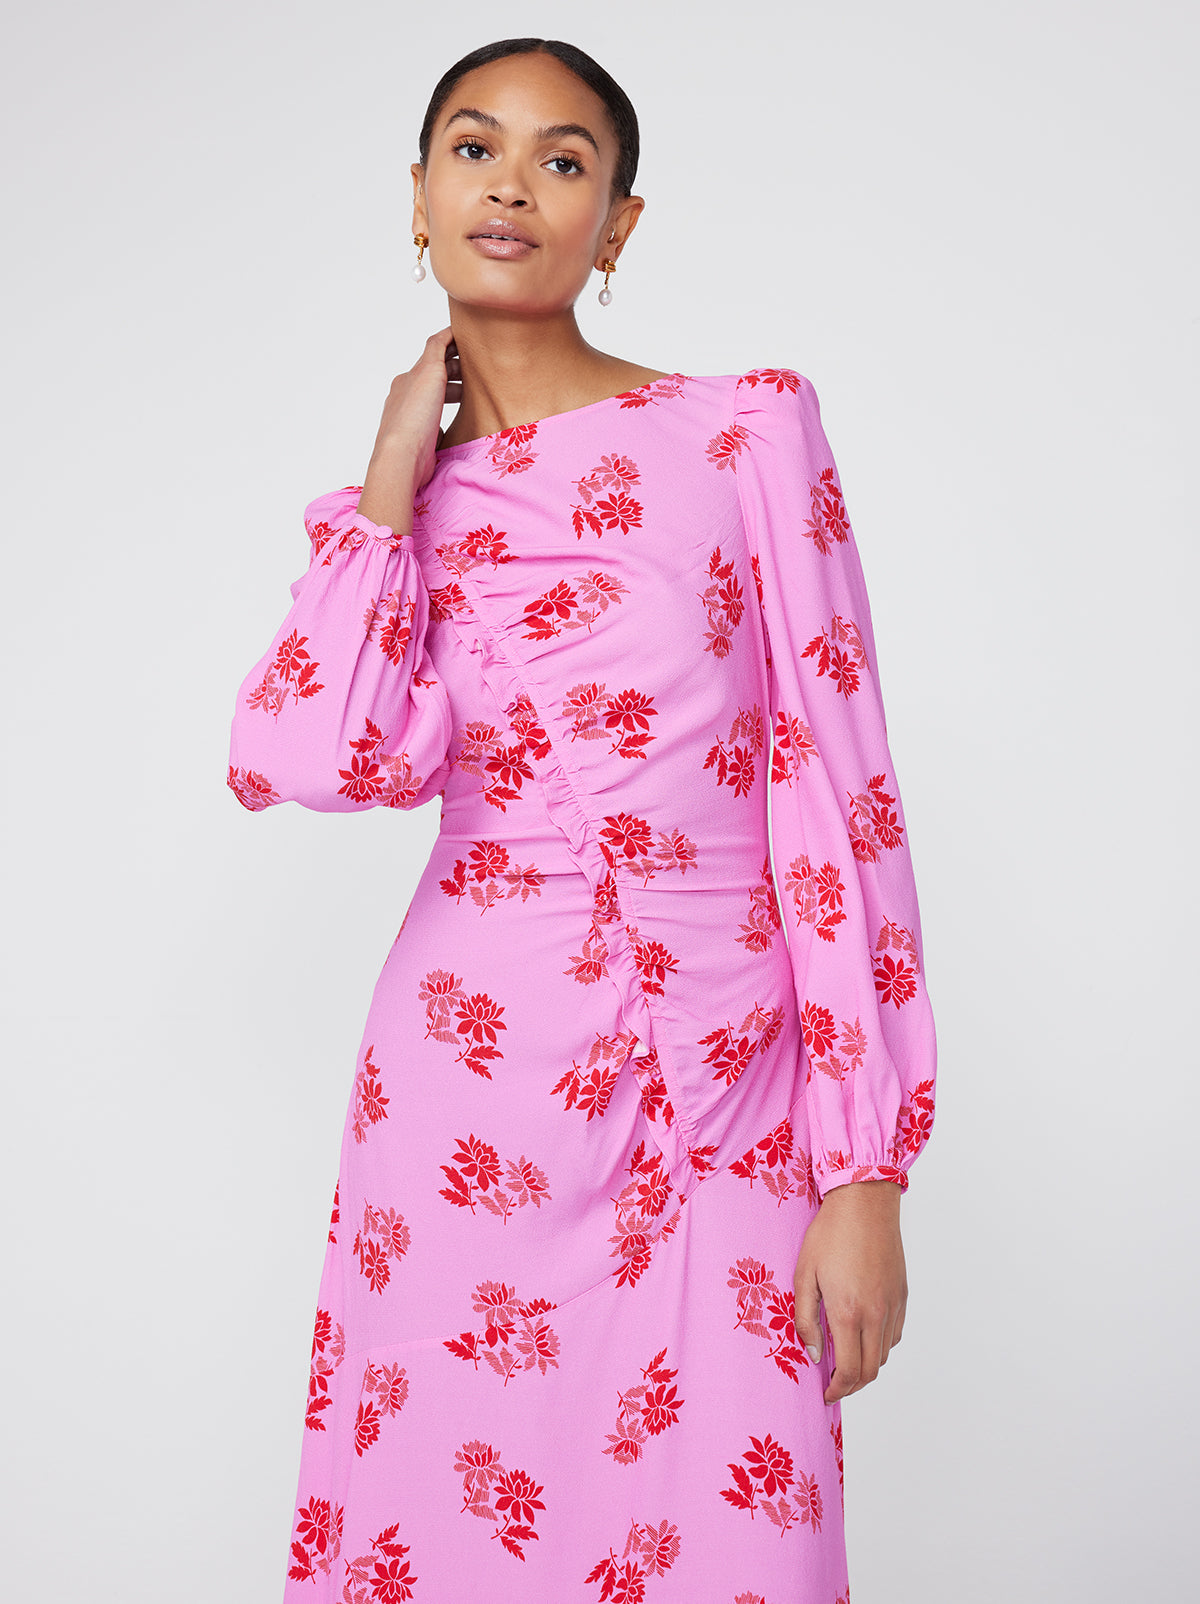 Dorothy Pink Floral Maxi Dress By KITRI Studio